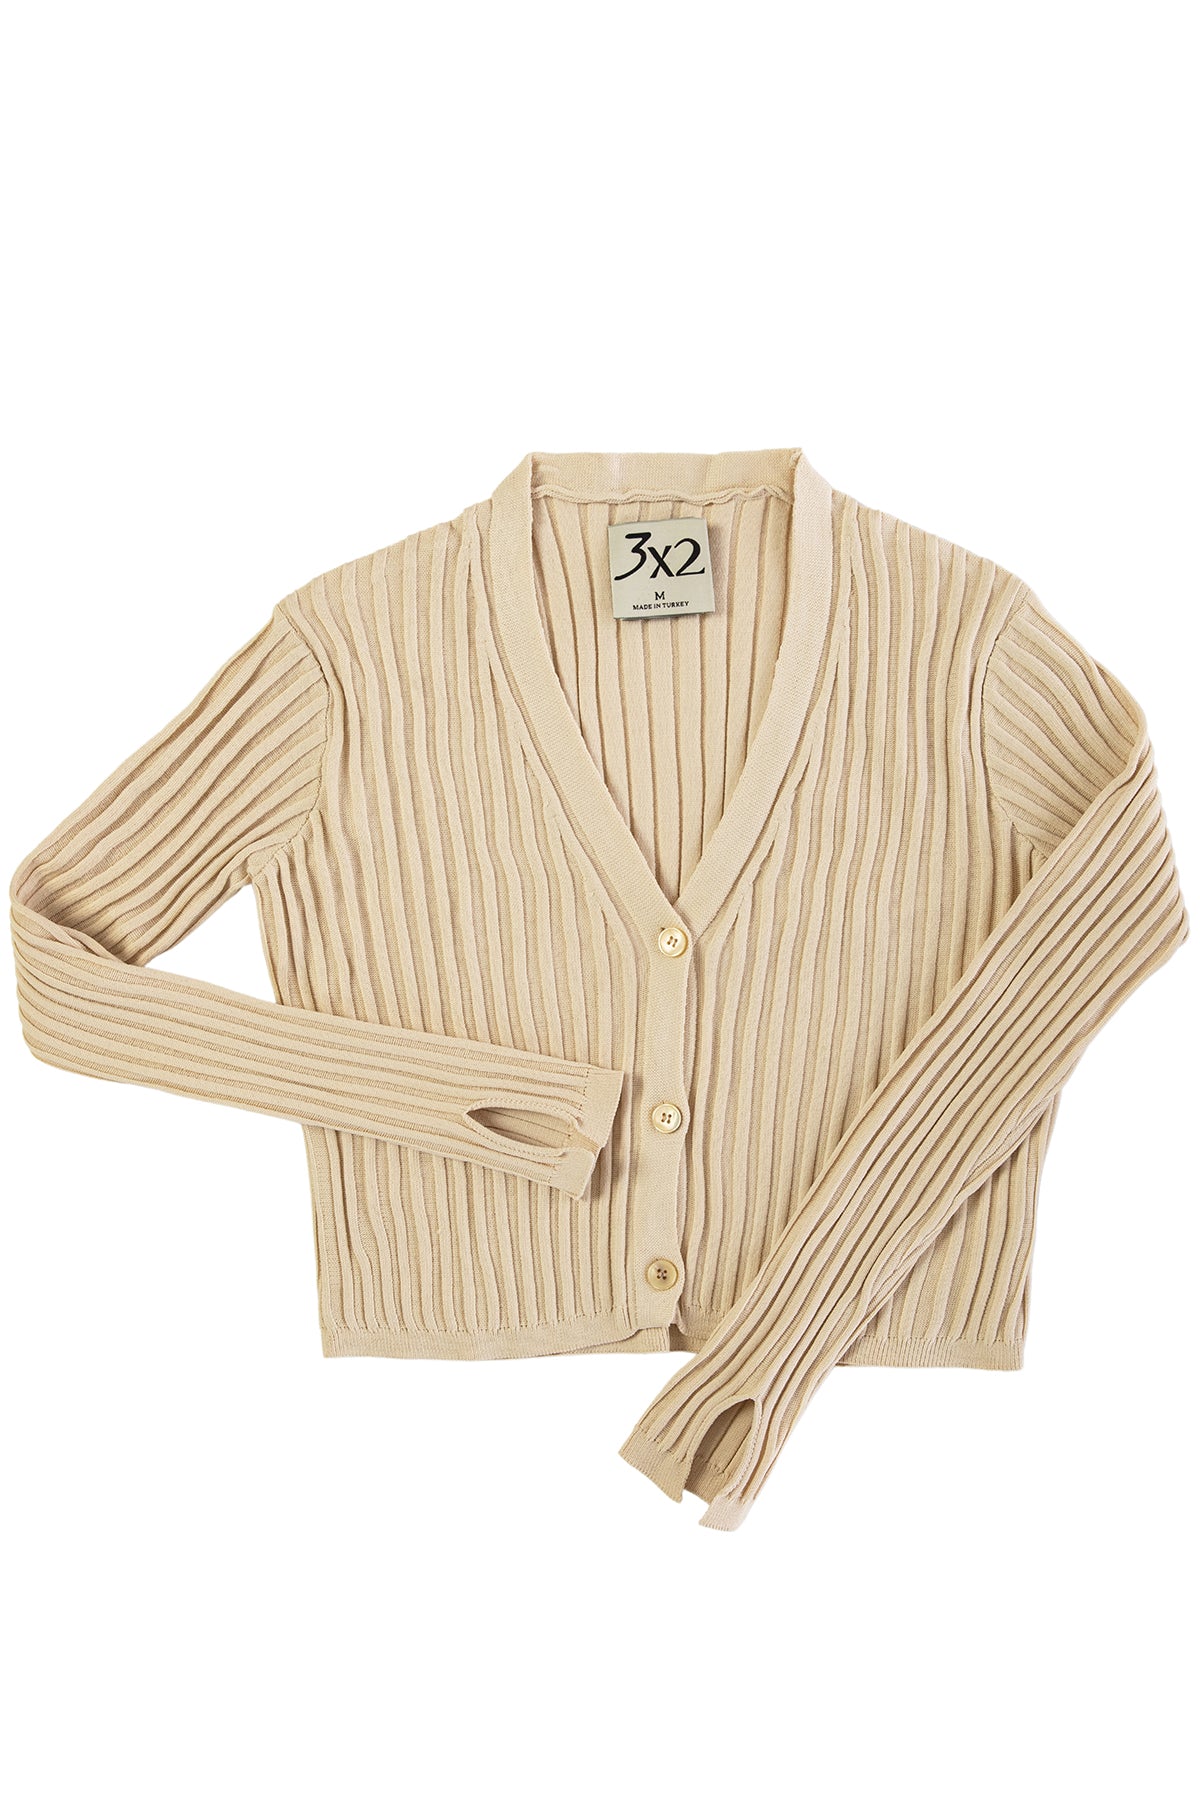 Stone Colored Spring Knitwear Cardigan